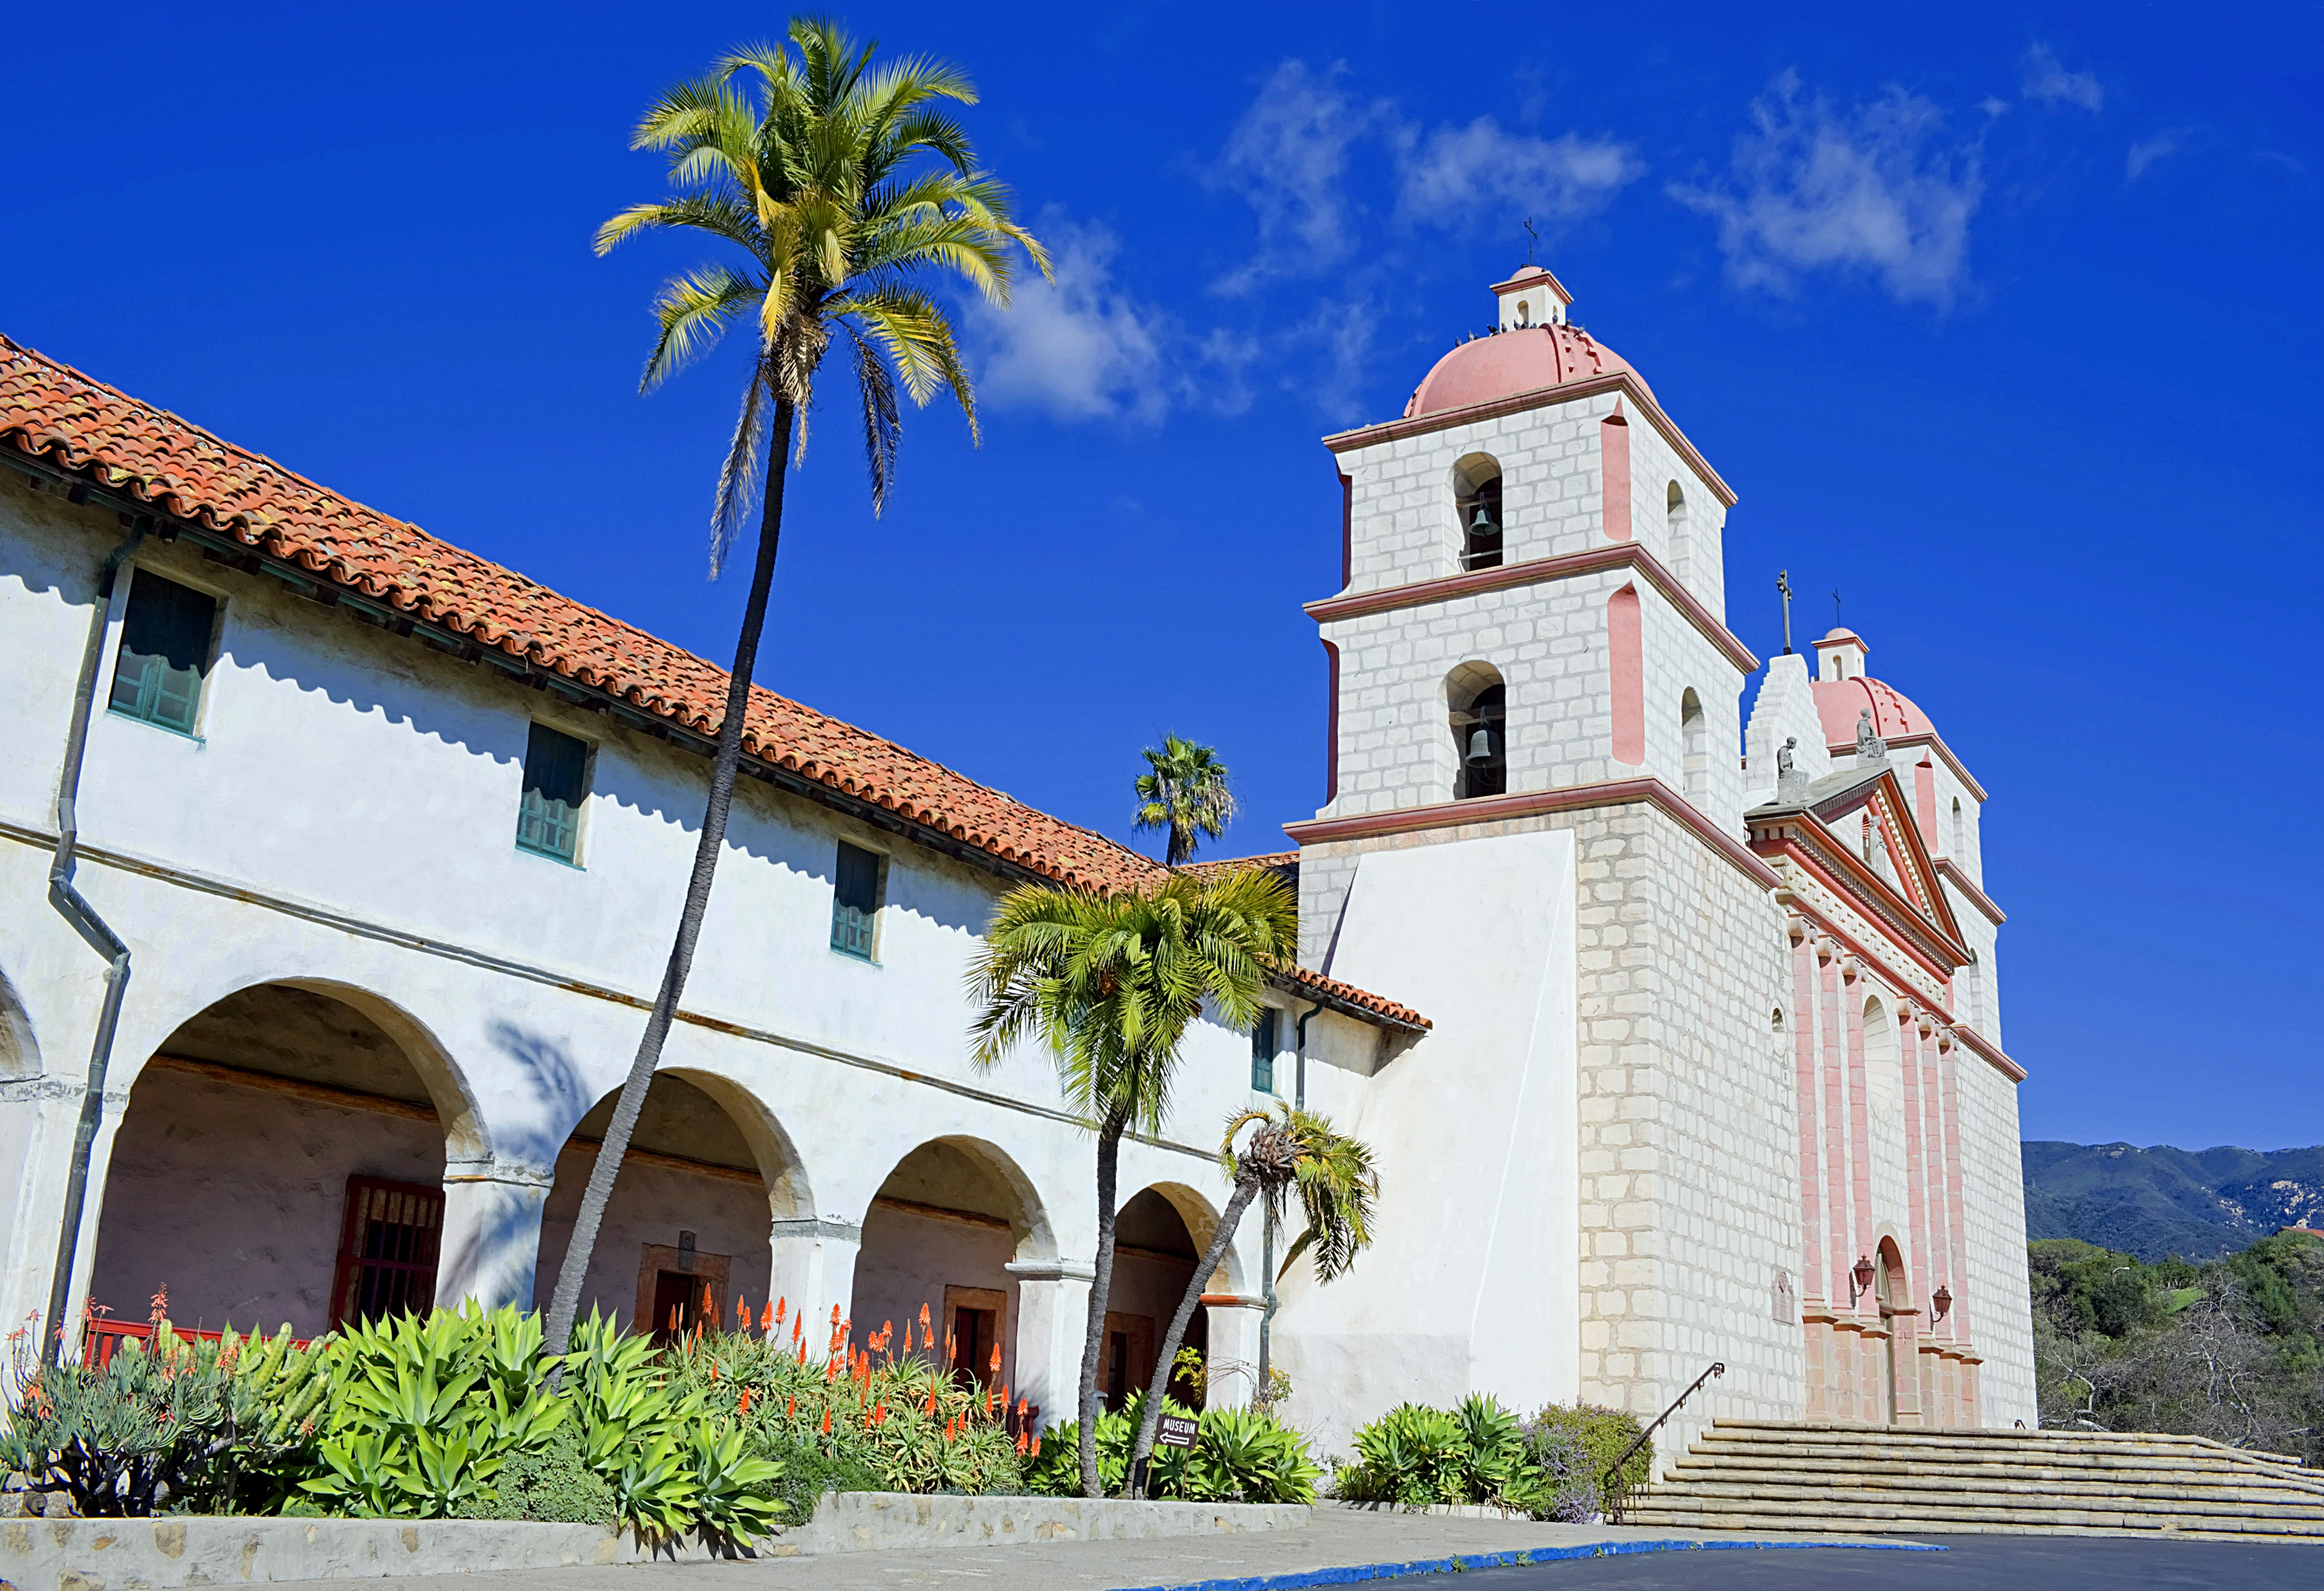 The mission church in Santa Barbara is just one of many reminders of the Spanish legacy in California. Image by Marco Simoni / Getty Images